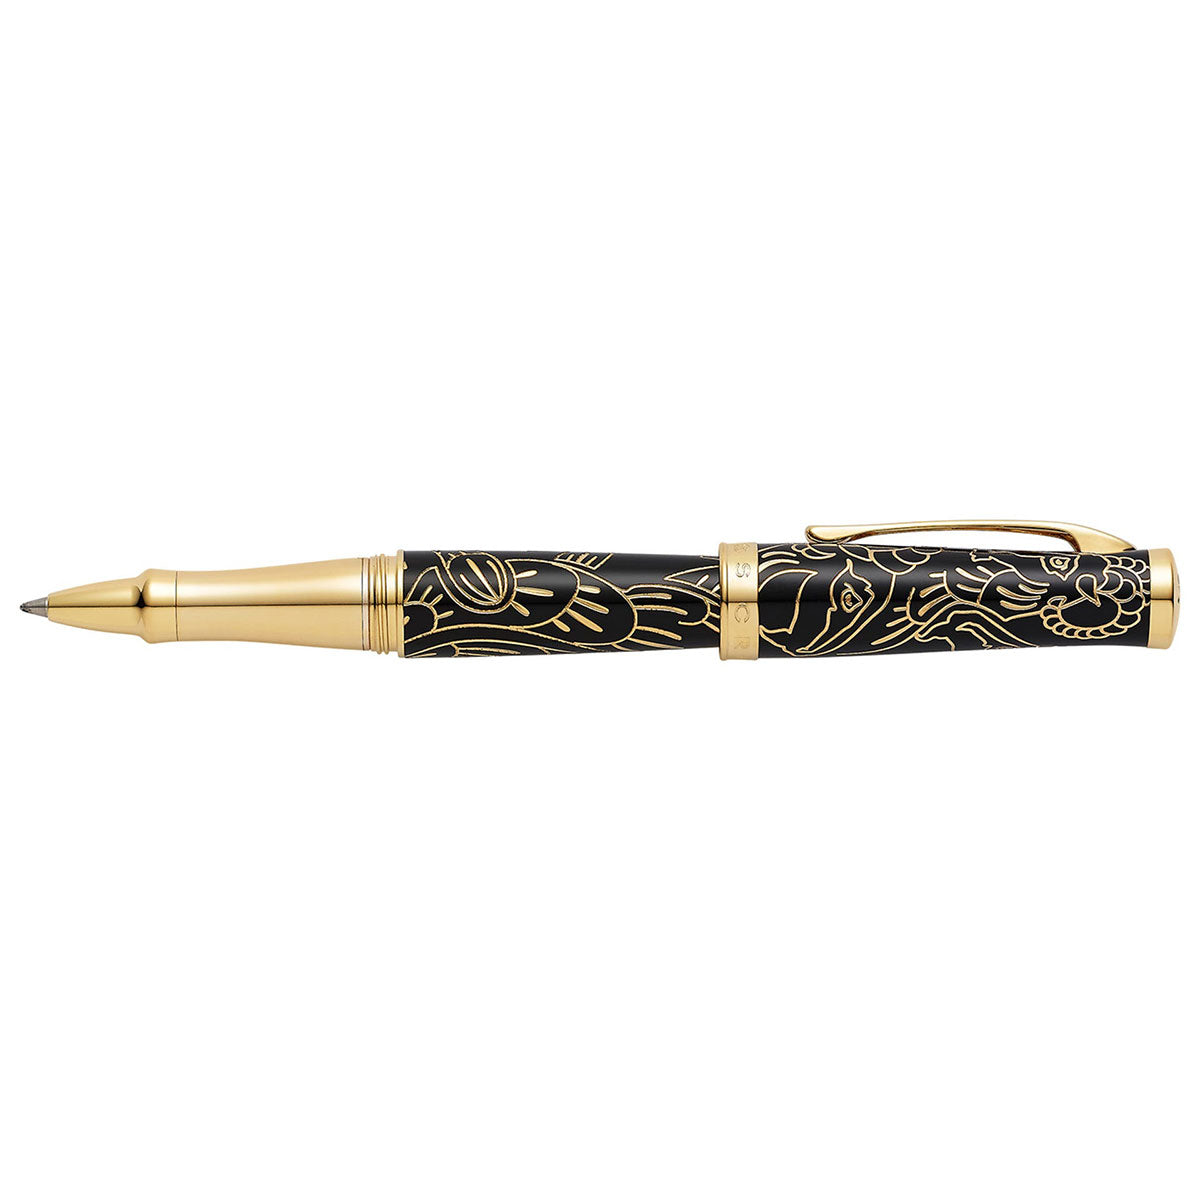 Cross 2015 Year of the Goat Special Edition Sauvage Rollerball Pen  Cross Rollerball Pens